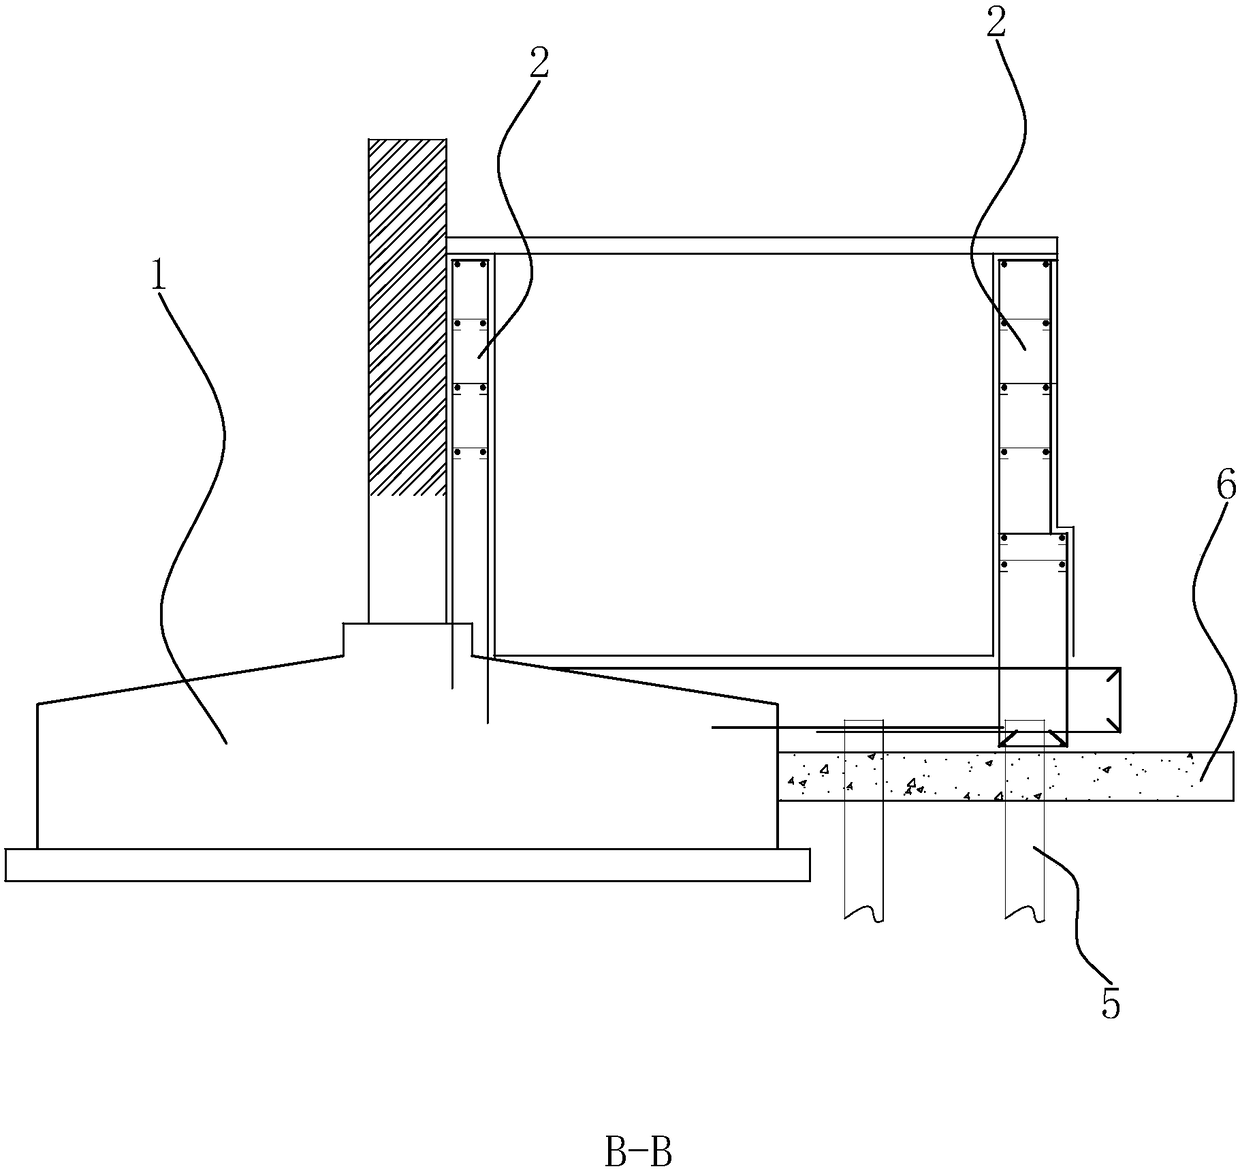 Construction method for additionally arranging of elevators to existing multi-storey residence